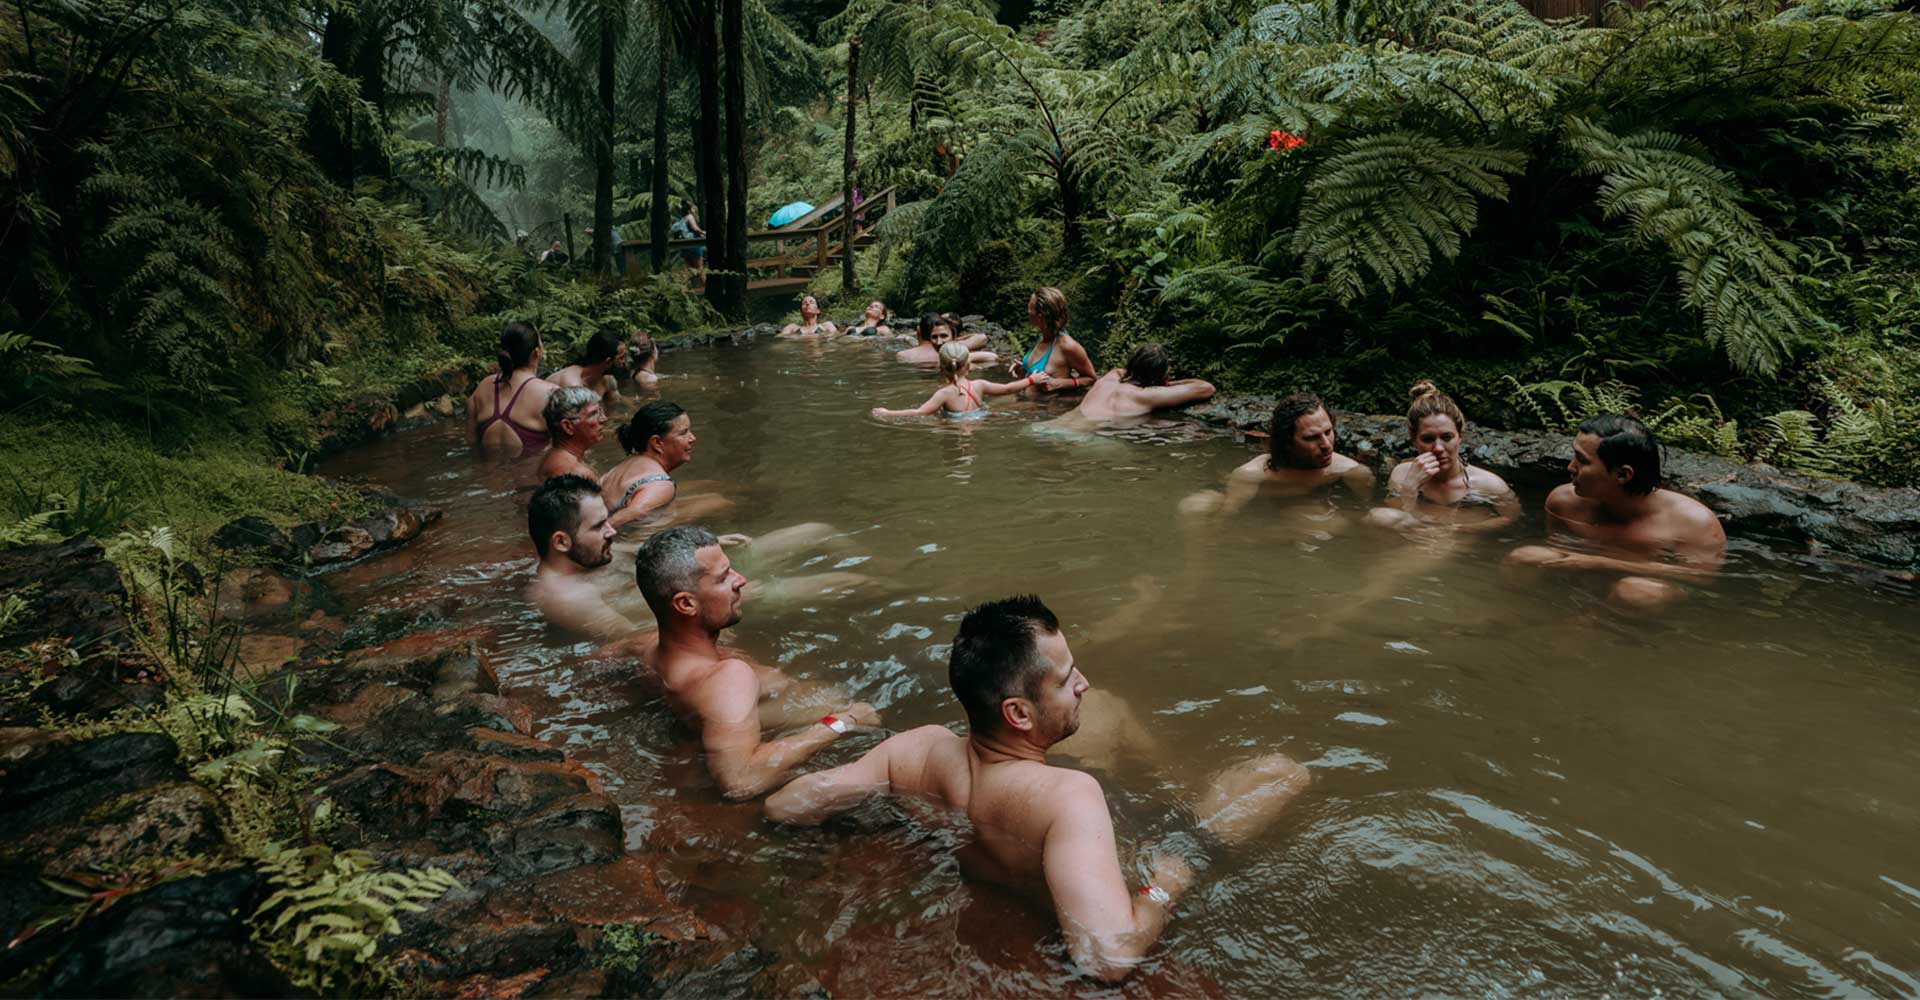 The thermal baths in a Jurassic Park scenery are the perfect place to chill.